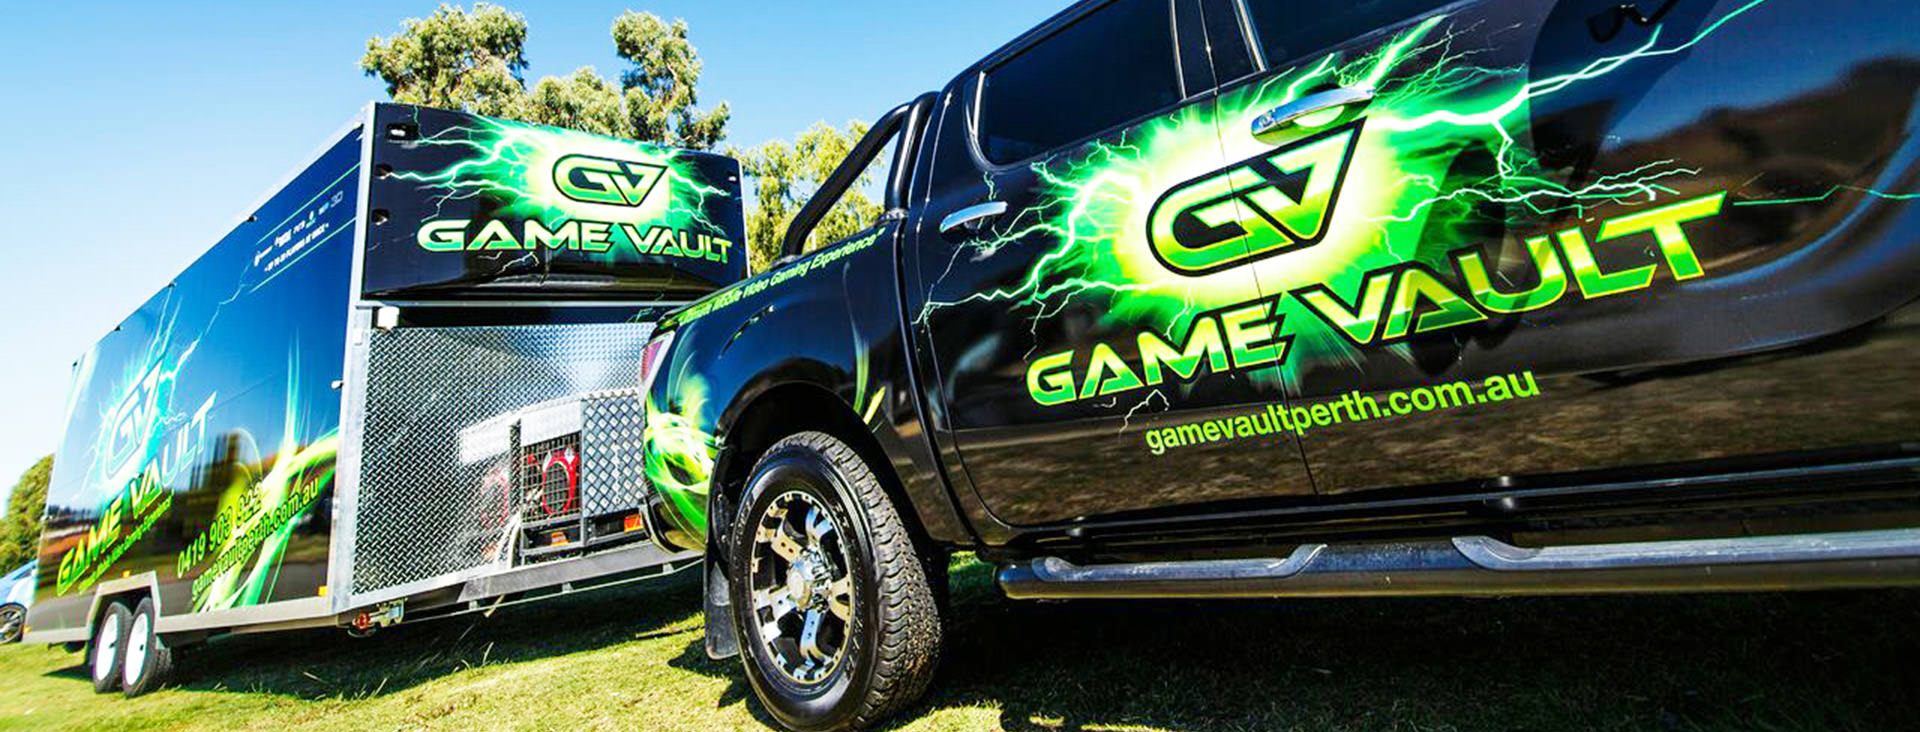 Kids Party Ideas - Game Vault Perth Brings it Home